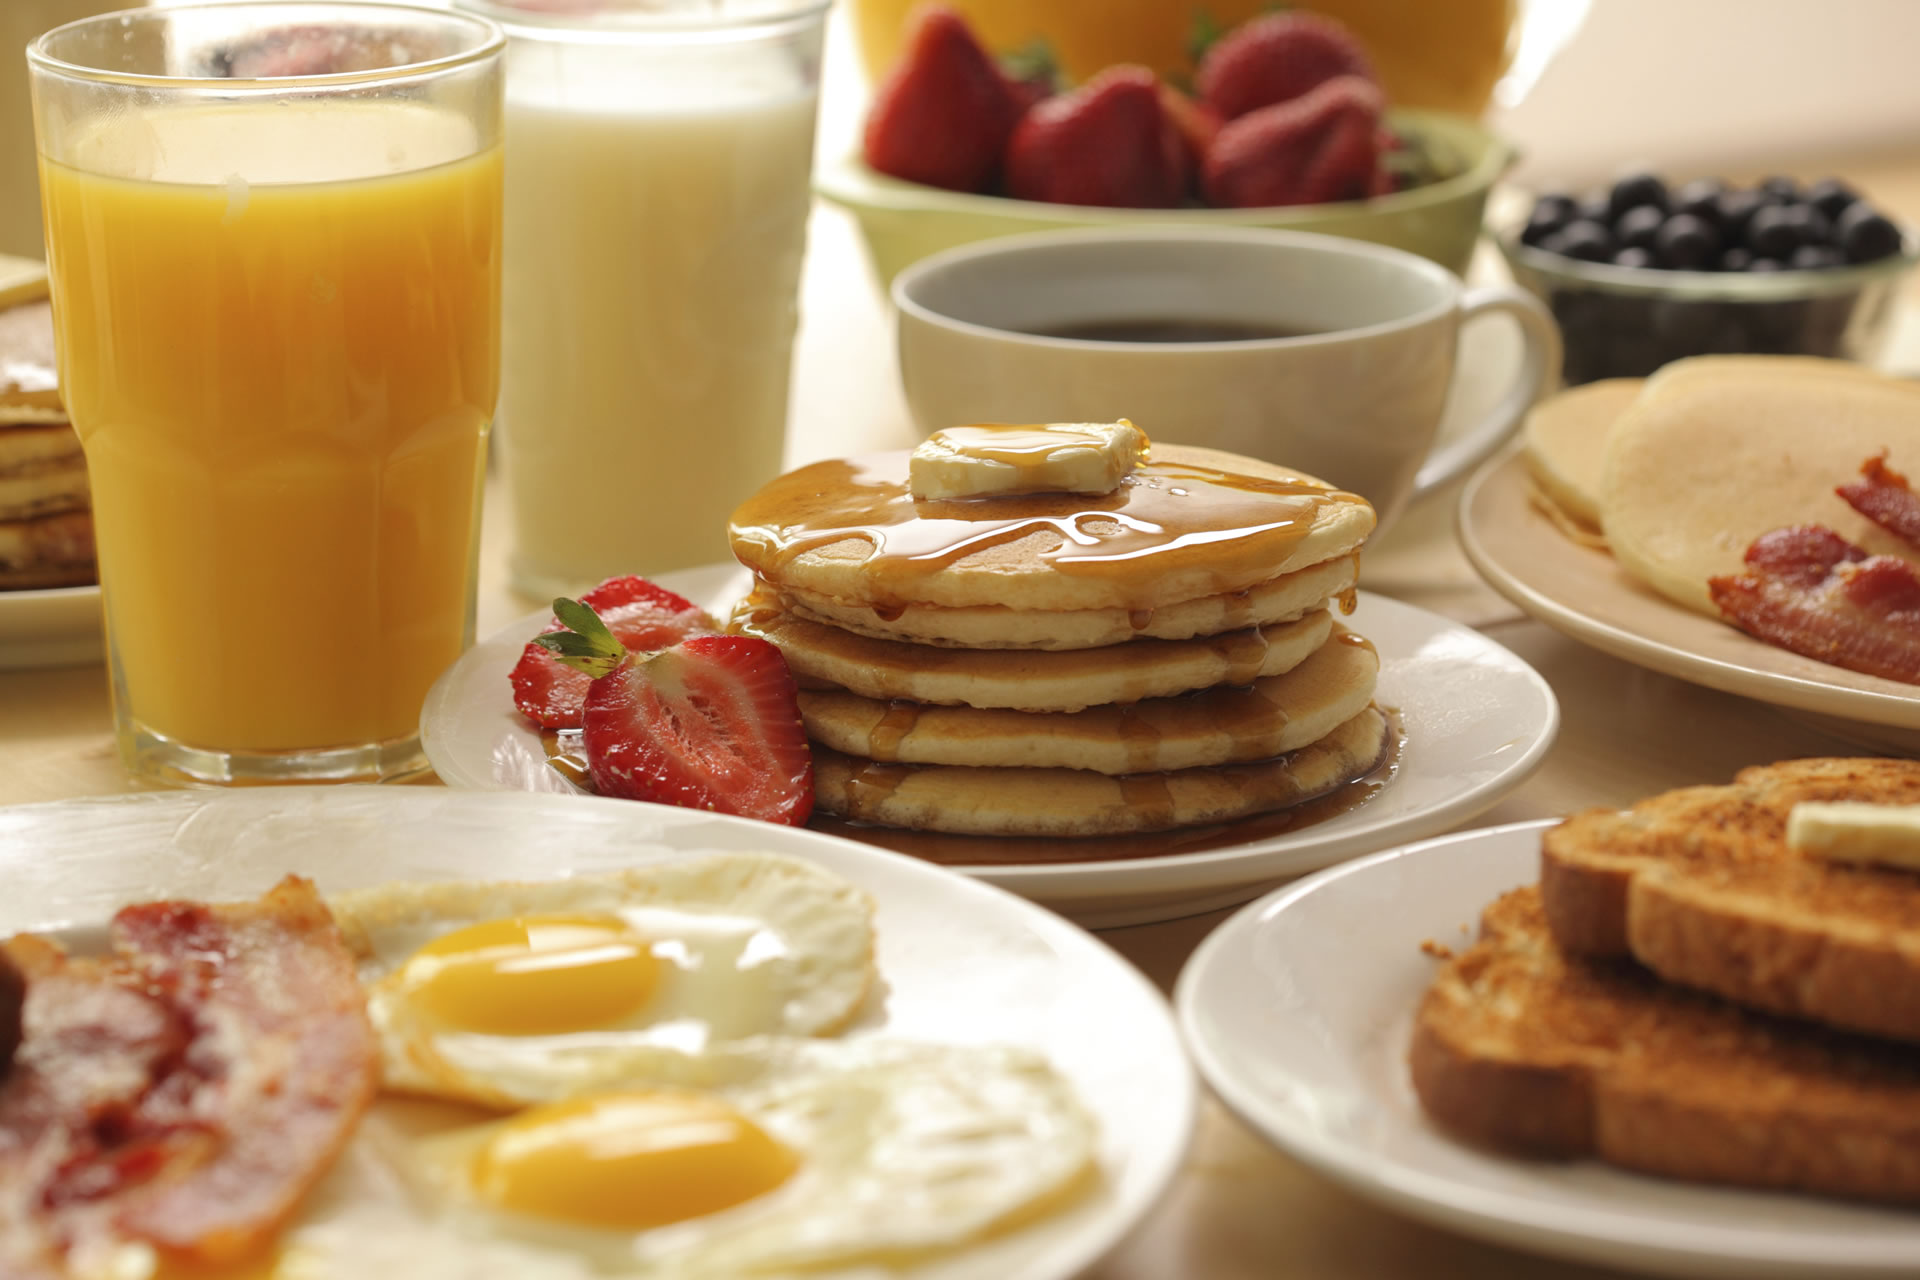 Breakfast spread featuring pancakes and maple syrup, sunny-side up eggs, bacon, toast, orange juice, milk, coffee, and berries.